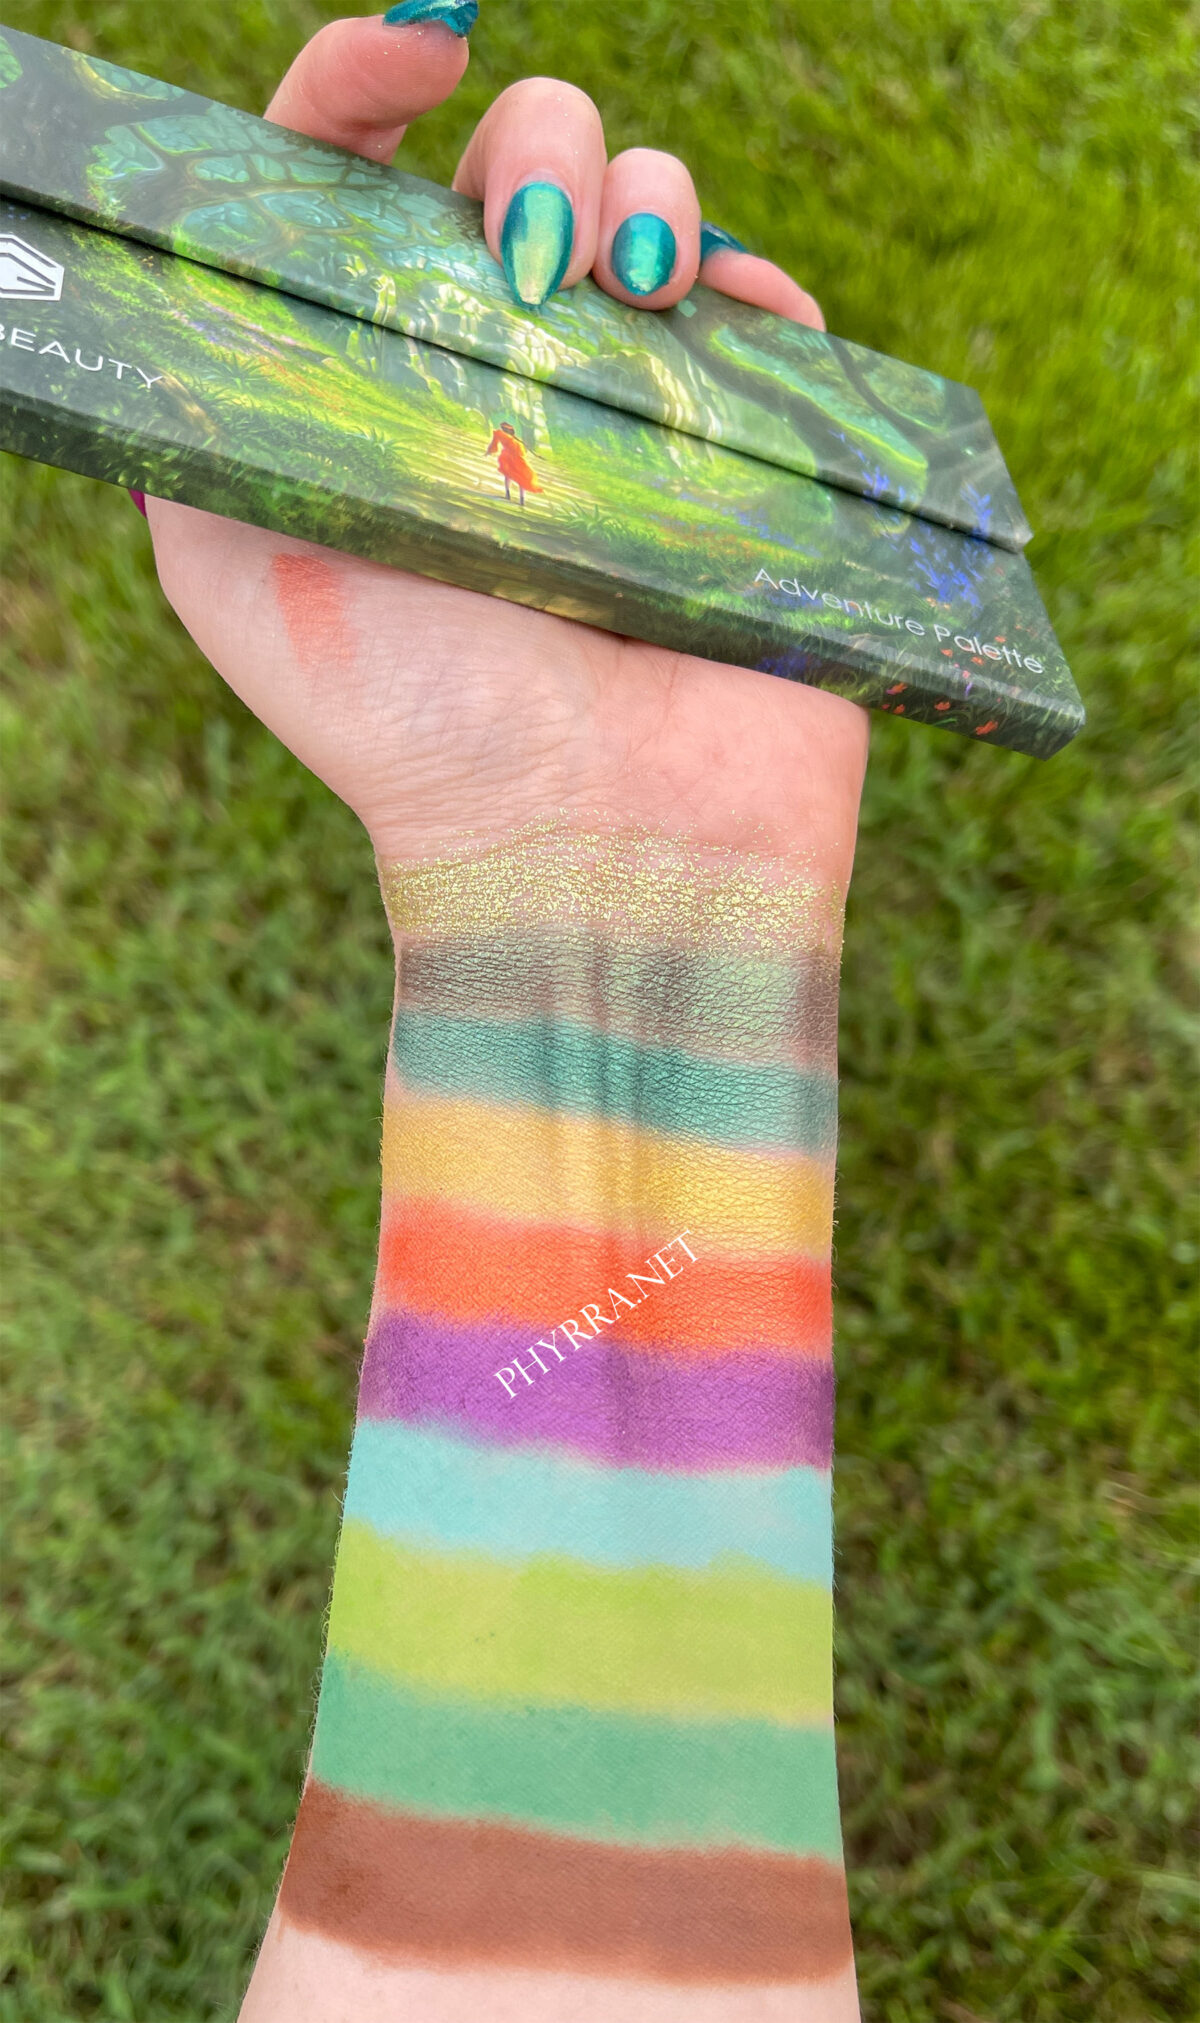 Game Beauty Adventure Swatches on Fair Skin